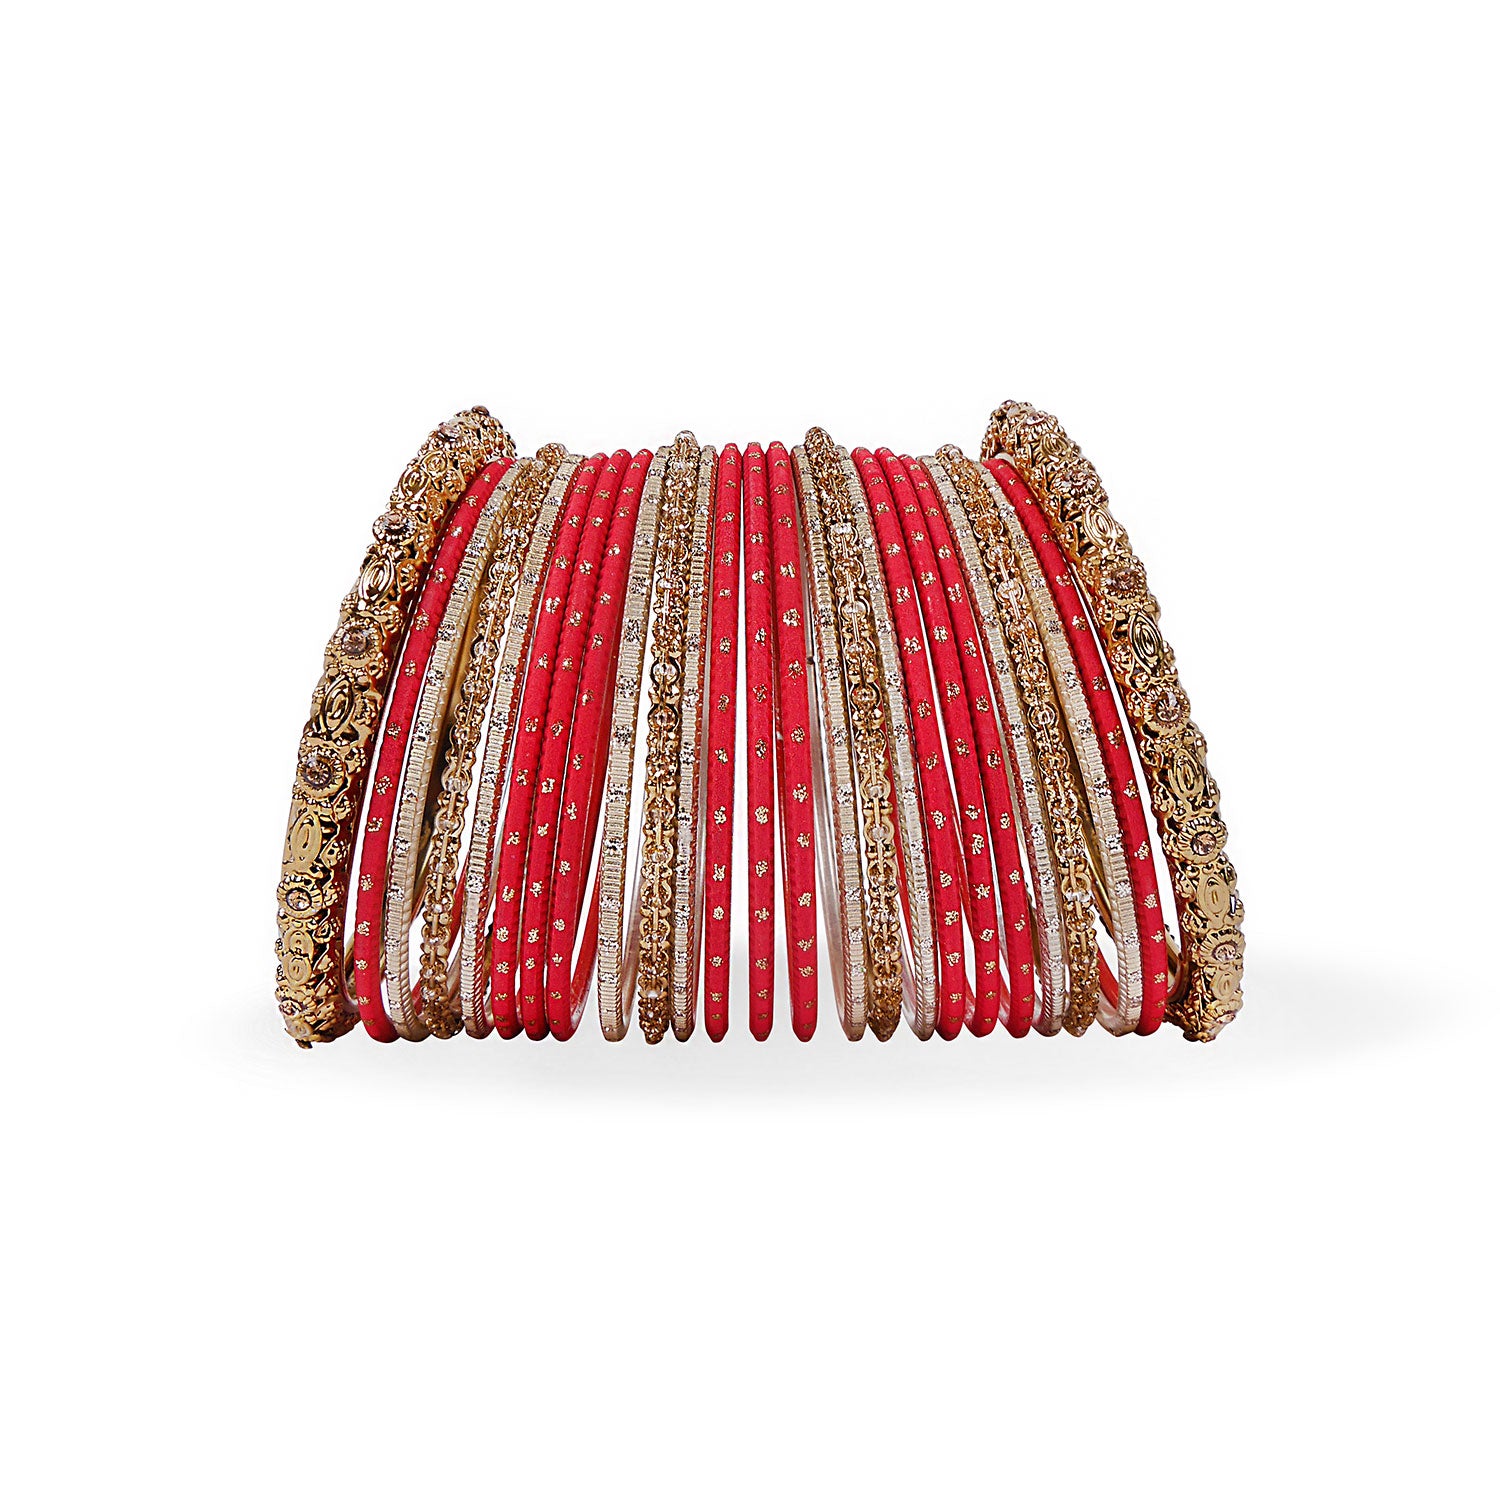 Classic Bangle Set in Lava Red